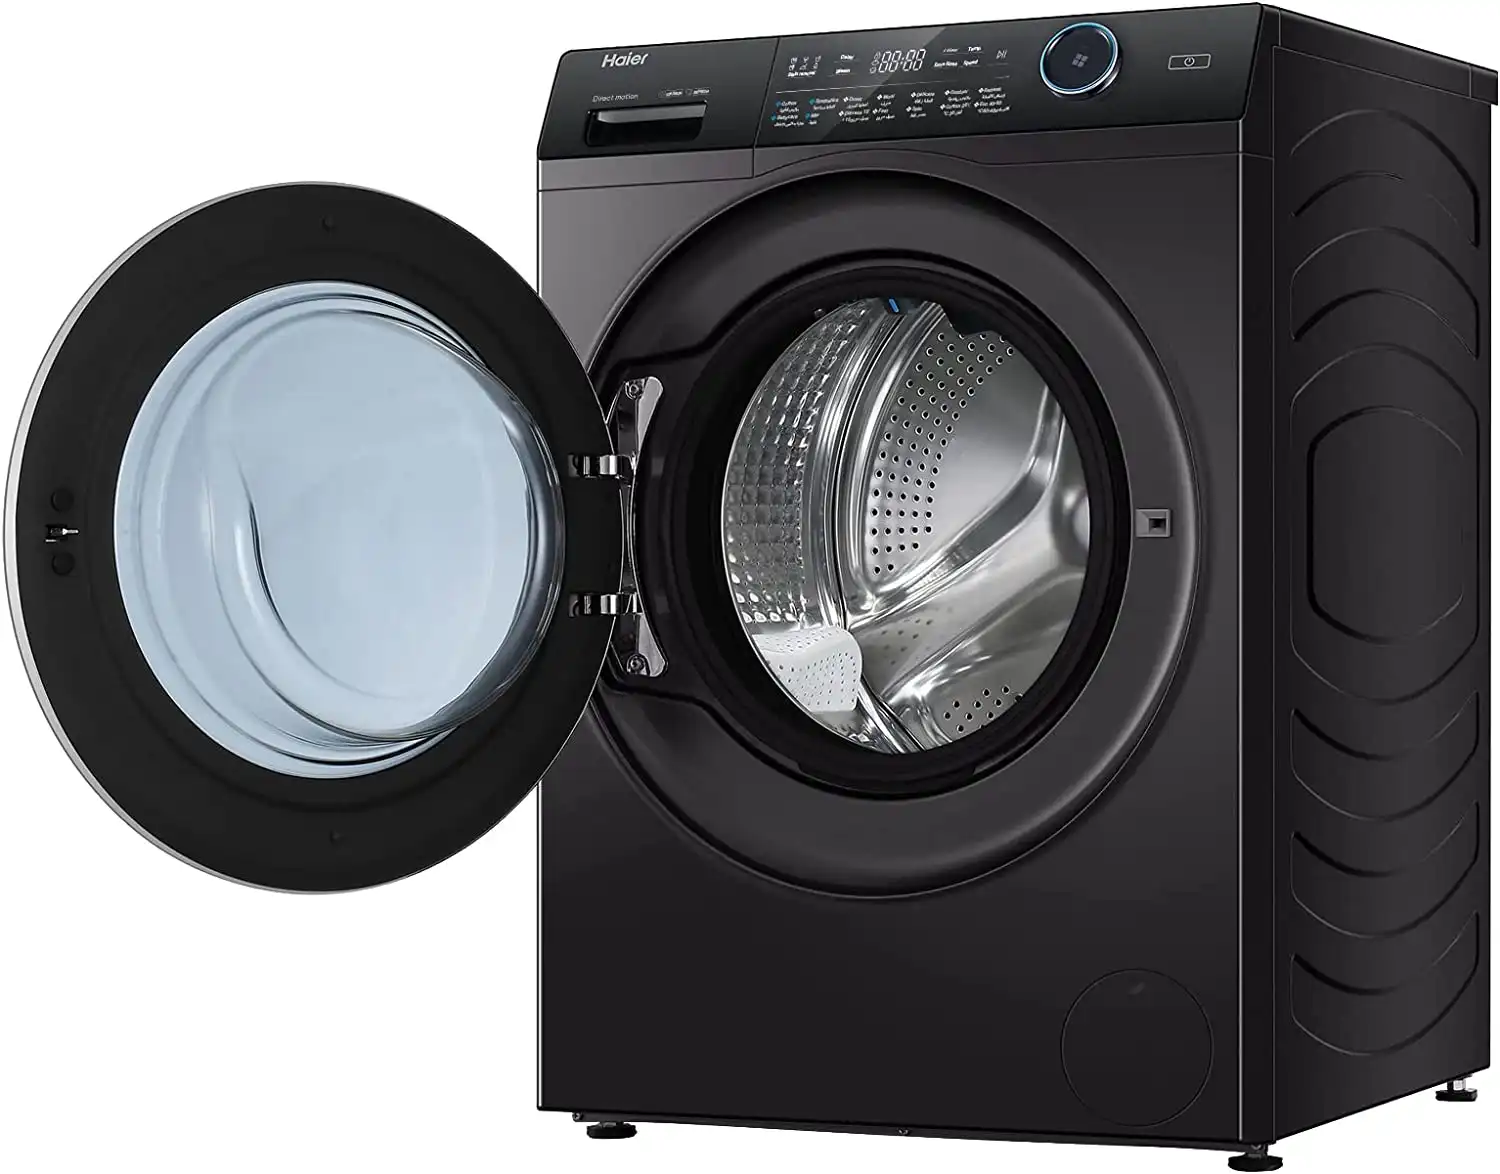 Haier Fully Automatic Washing Machine, Front Loading, 12 KG, Inverter, Steam, Silver with Black Frame, HW120-B14979S8